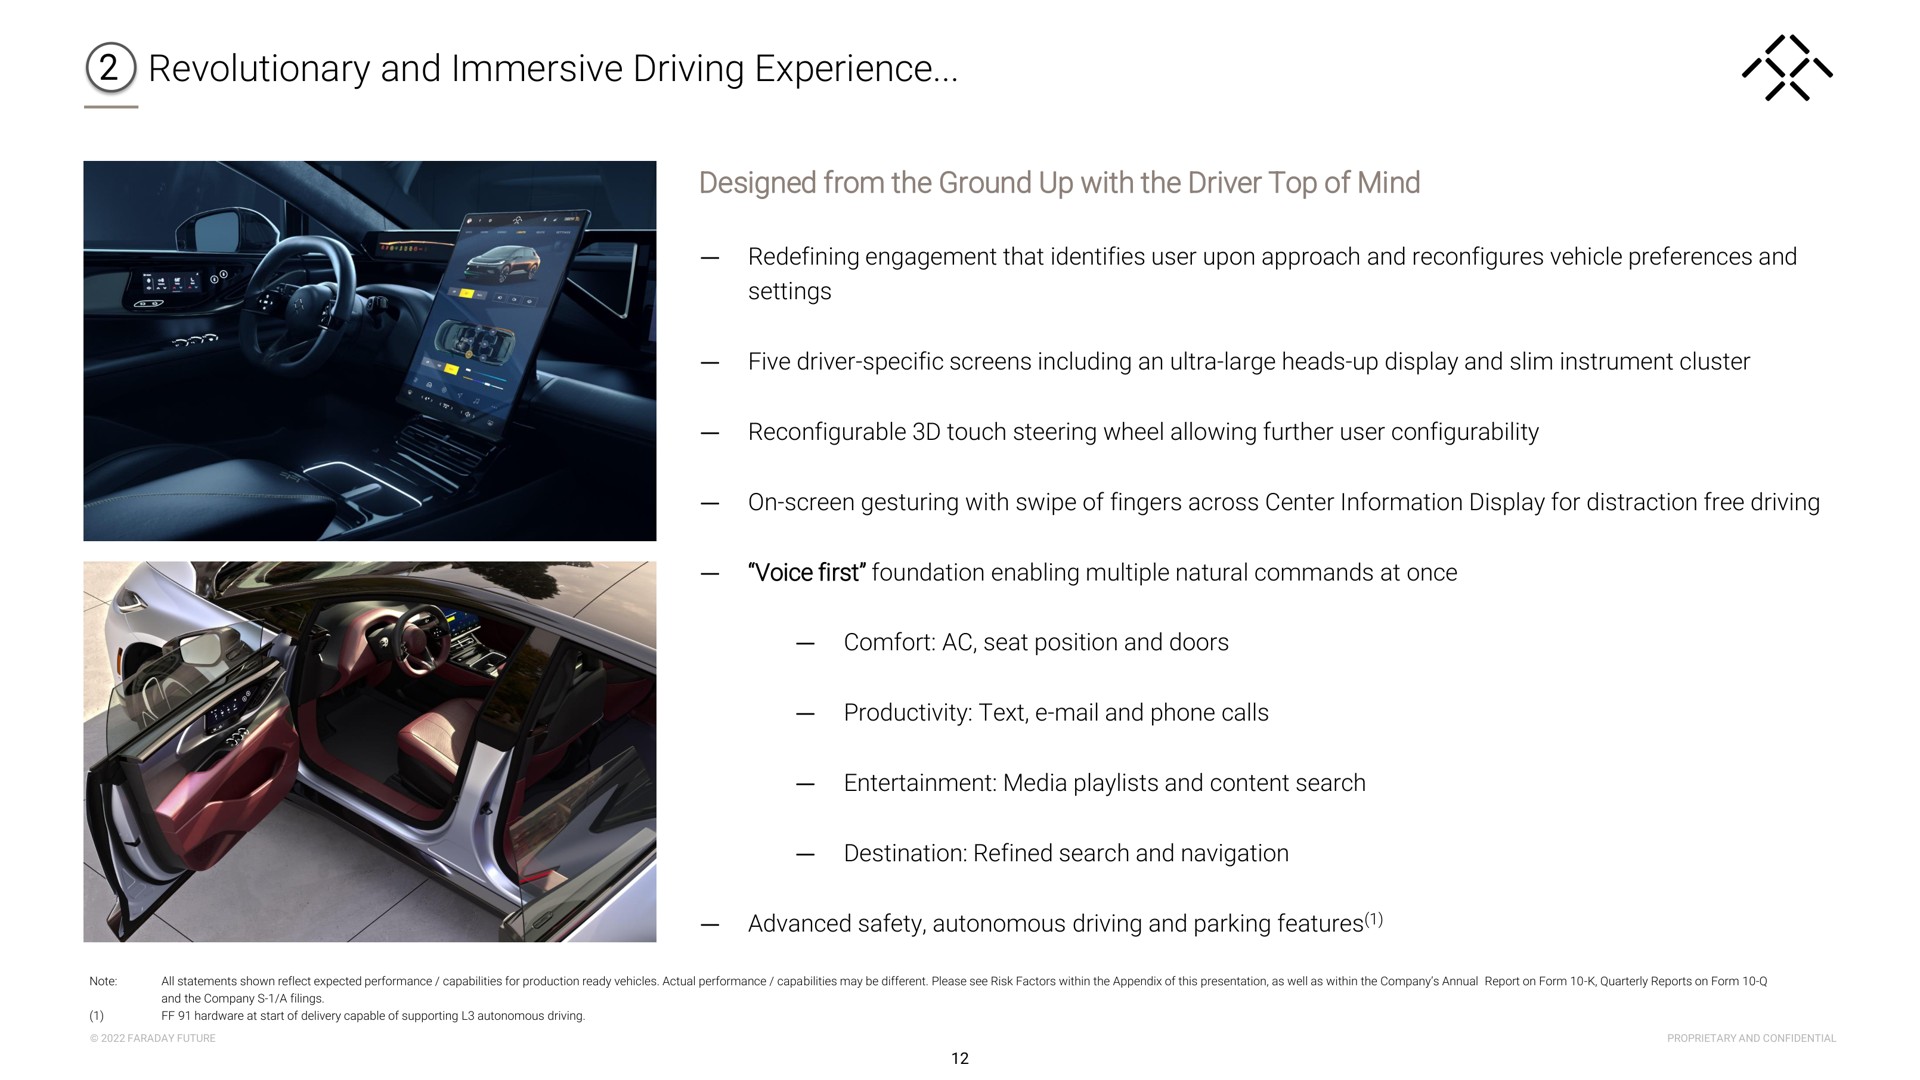 revolutionary and immersive driving experience designed from the ground up with the driver top of mind | Faraday Future